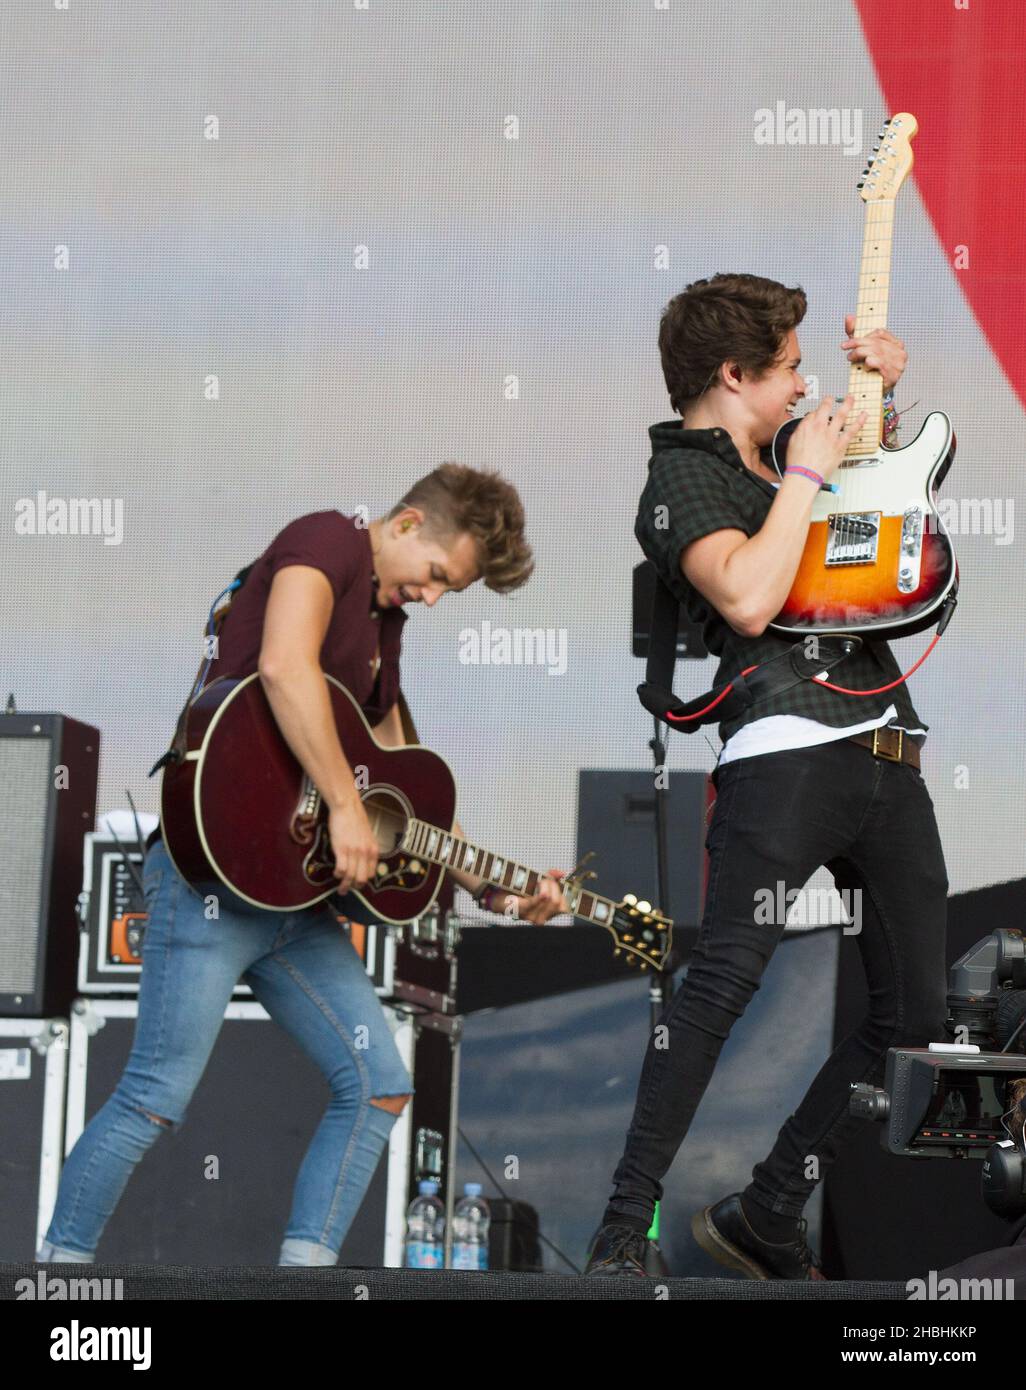 Bradley Simpson and James McVey of The Vamps perform on stage at Barclaycard British Summer Time in Hyde Park, London. Stock Photo